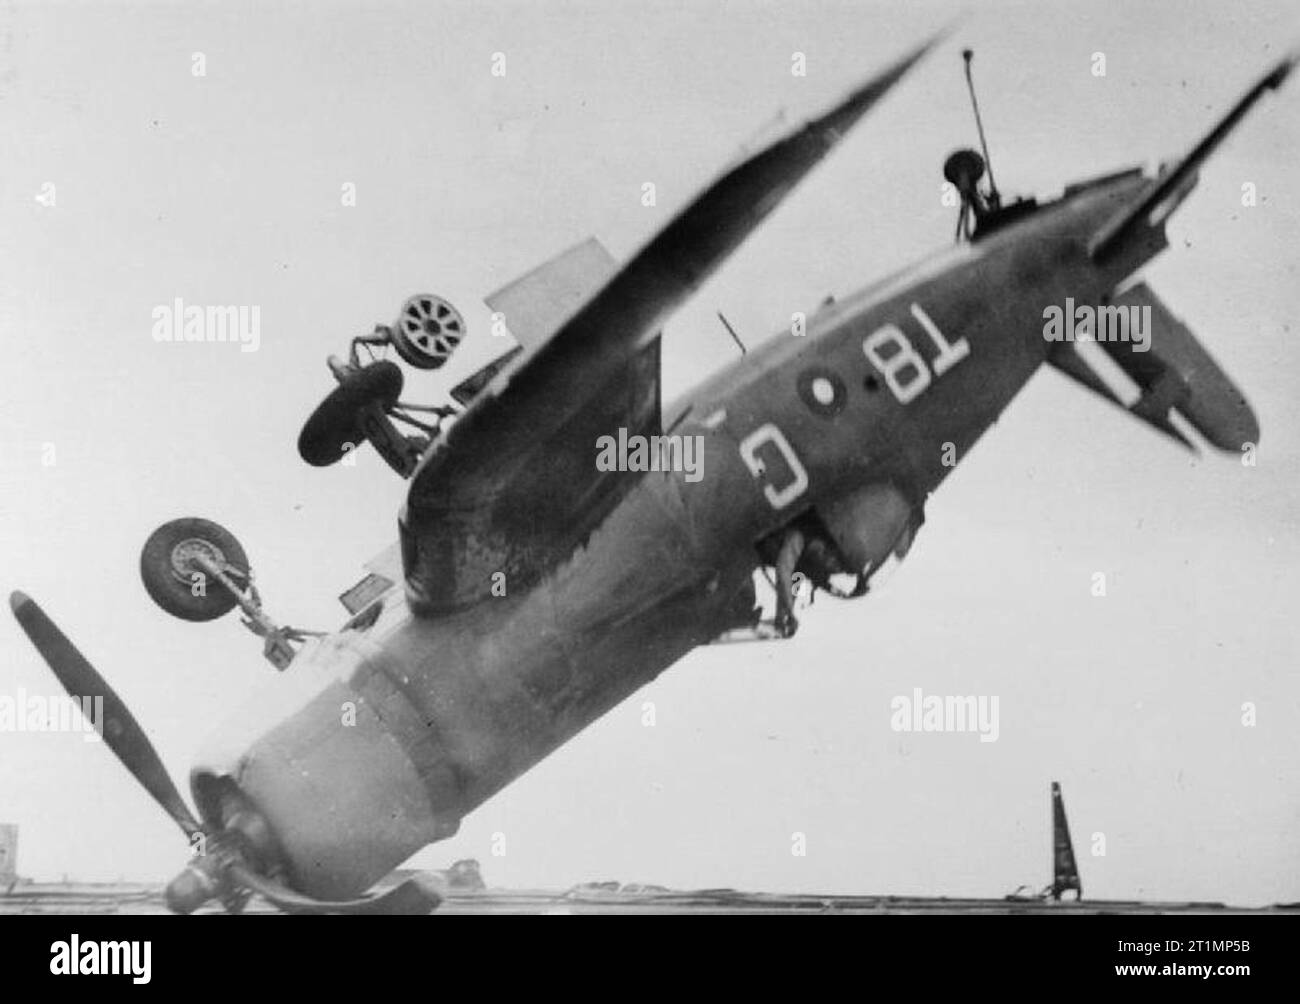 Original description: 'The pilot of this Chance-Vought Corsair fighter which crashed through the barrier of HMS Smiter when landing on and ended upside down resting at around forty five degrees, escaped with only a bruised thumb. This took place during operations against Sakishima in support of the American landing on Okinawa.' Stock Photo